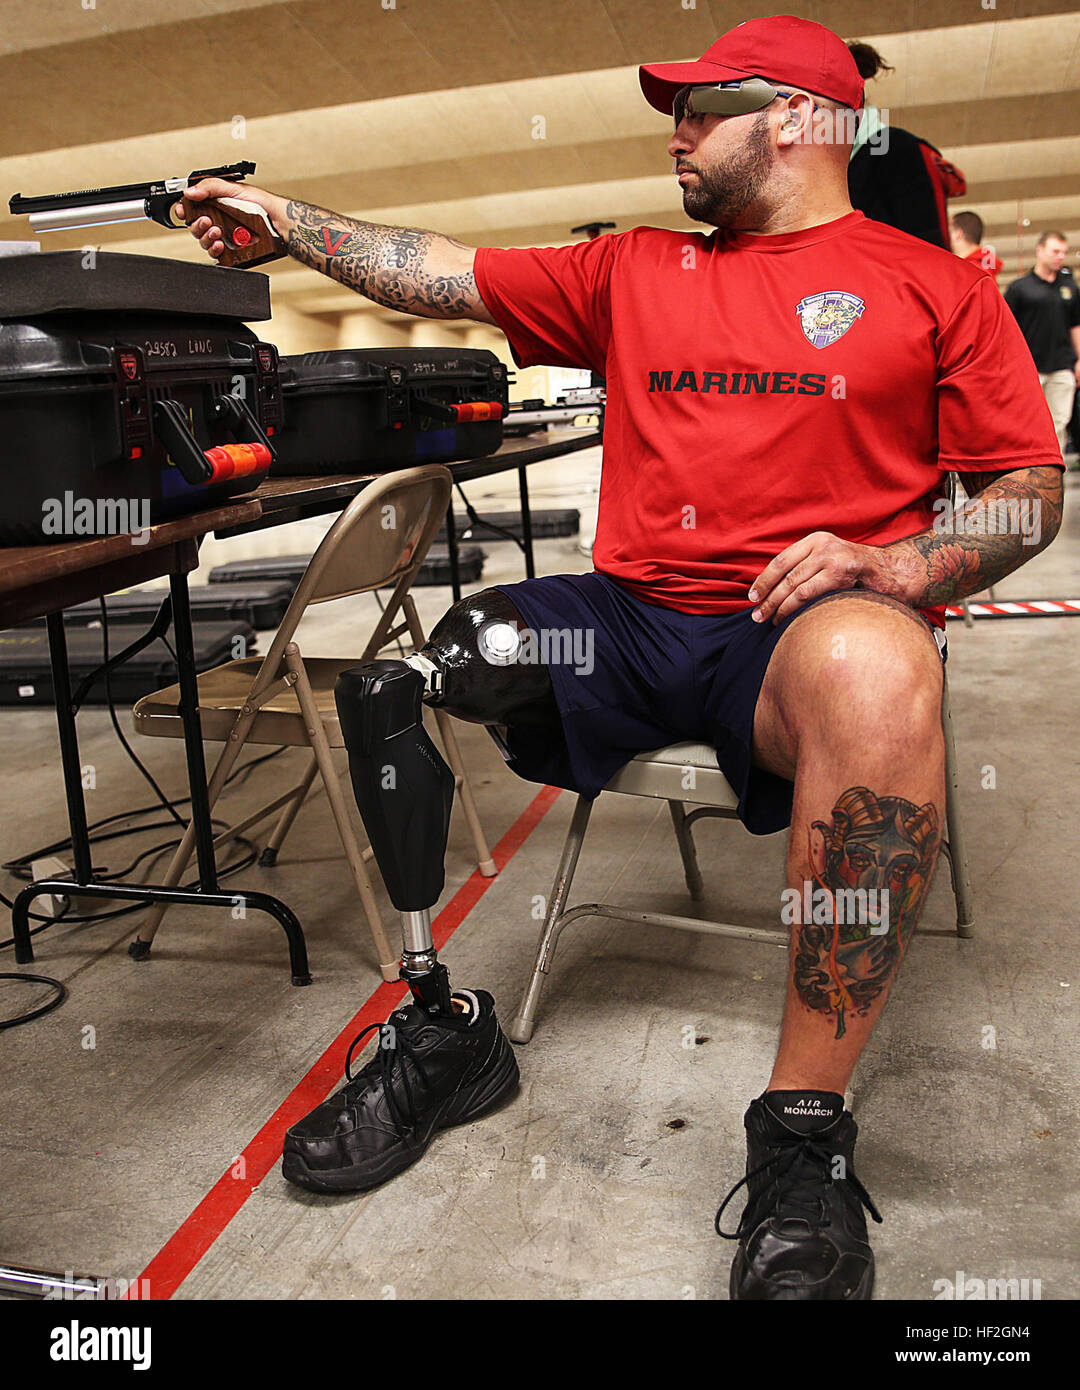 Sgt. Andres Burgos from Orlando, Florida, aims down range during shooting practice for the Marine team, September 24, in preparation for the 2014 Warrior Games. The Marine team has been training since September 15 in order to build team cohesion and acclimate to the above 6,000 ft. altitude of Colorado Springs. The Marine team is comprised of both active duty and veteran wounded, ill and injured Marines who are attached to or supported by the Wounded Warrior Regiment, the official unit of the Marine Corps charged with providing comprehensive non-medical recovery care to wounded, ill and injure Stock Photo